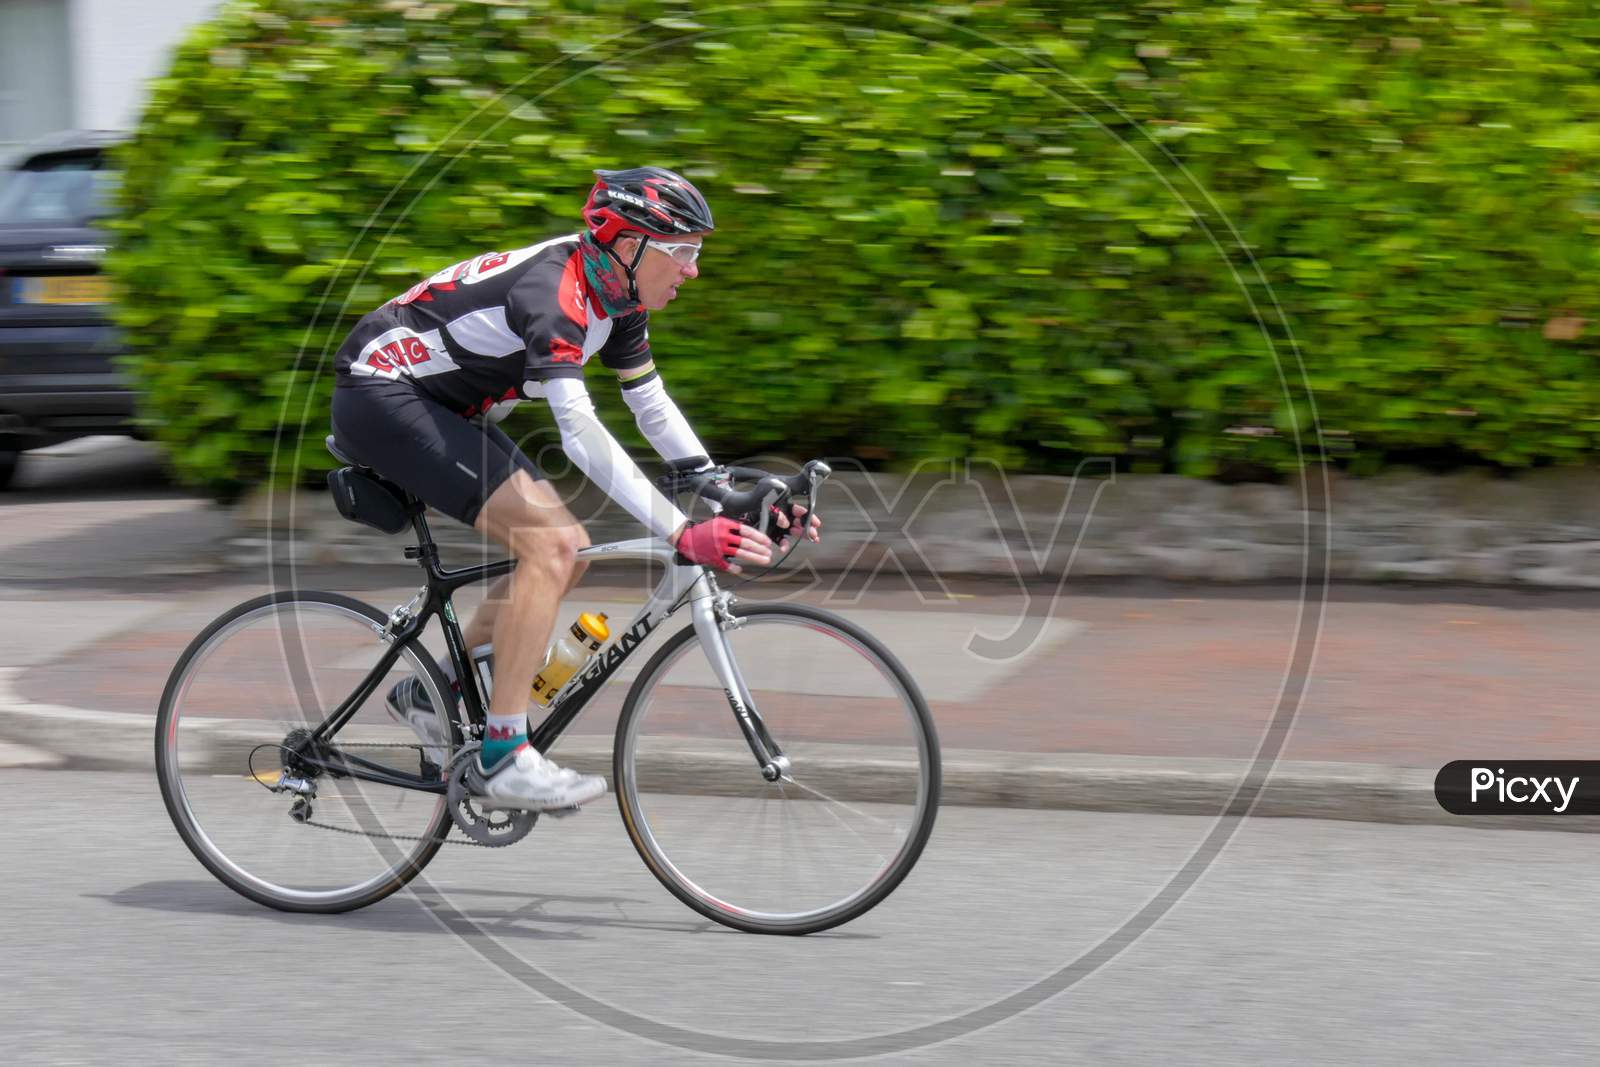 Cyclist Participating In The Velothon Cycling Event In Cardiff Wales On June 14, 2015